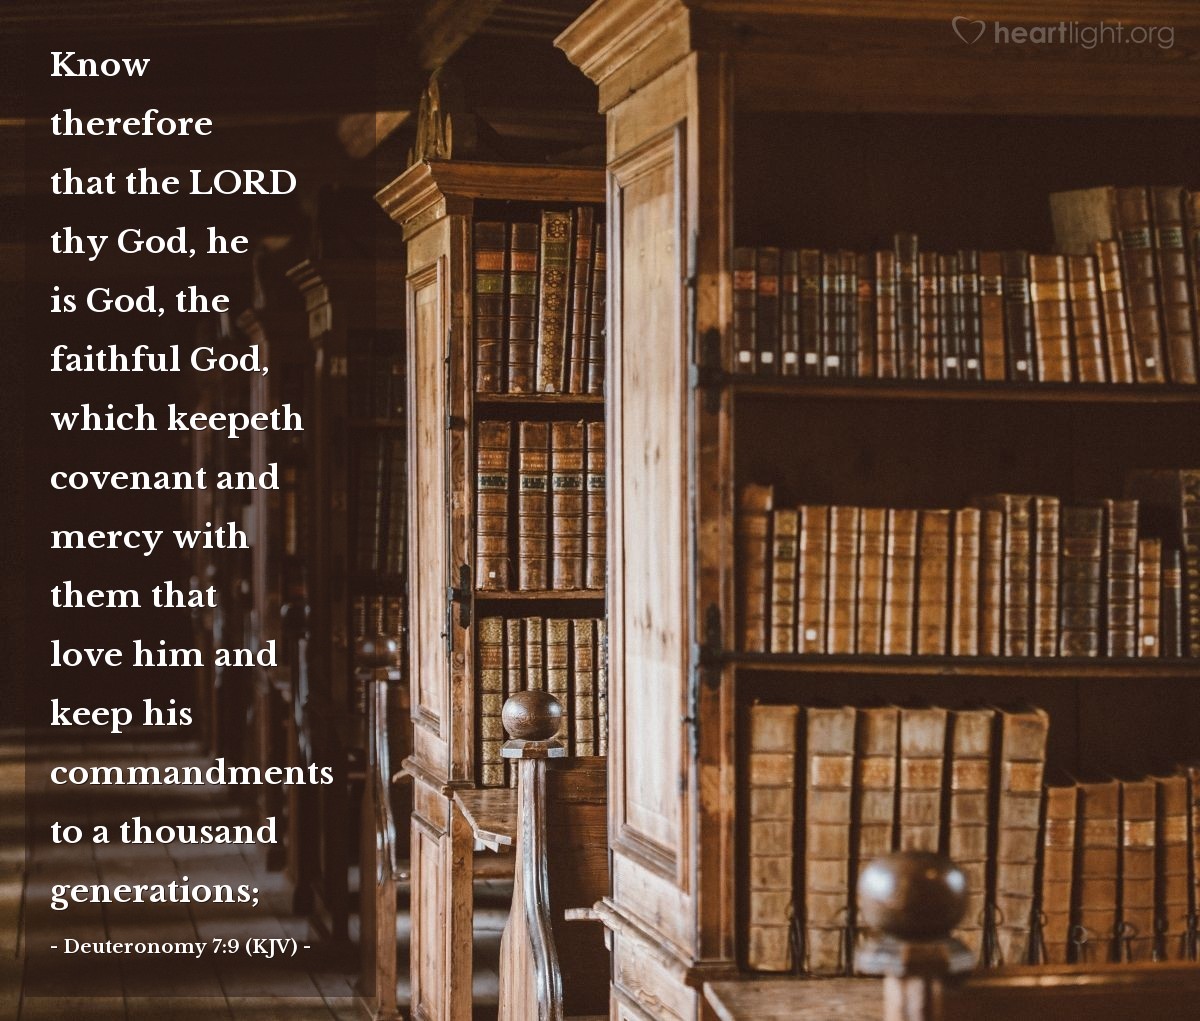 Illustration of Deuteronomy 7:9 (KJV) — Know therefore that the Lord thy God, he is God, the faithful God, which keepeth covenant and mercy with them that love him and keep his commandments to a thousand generations.